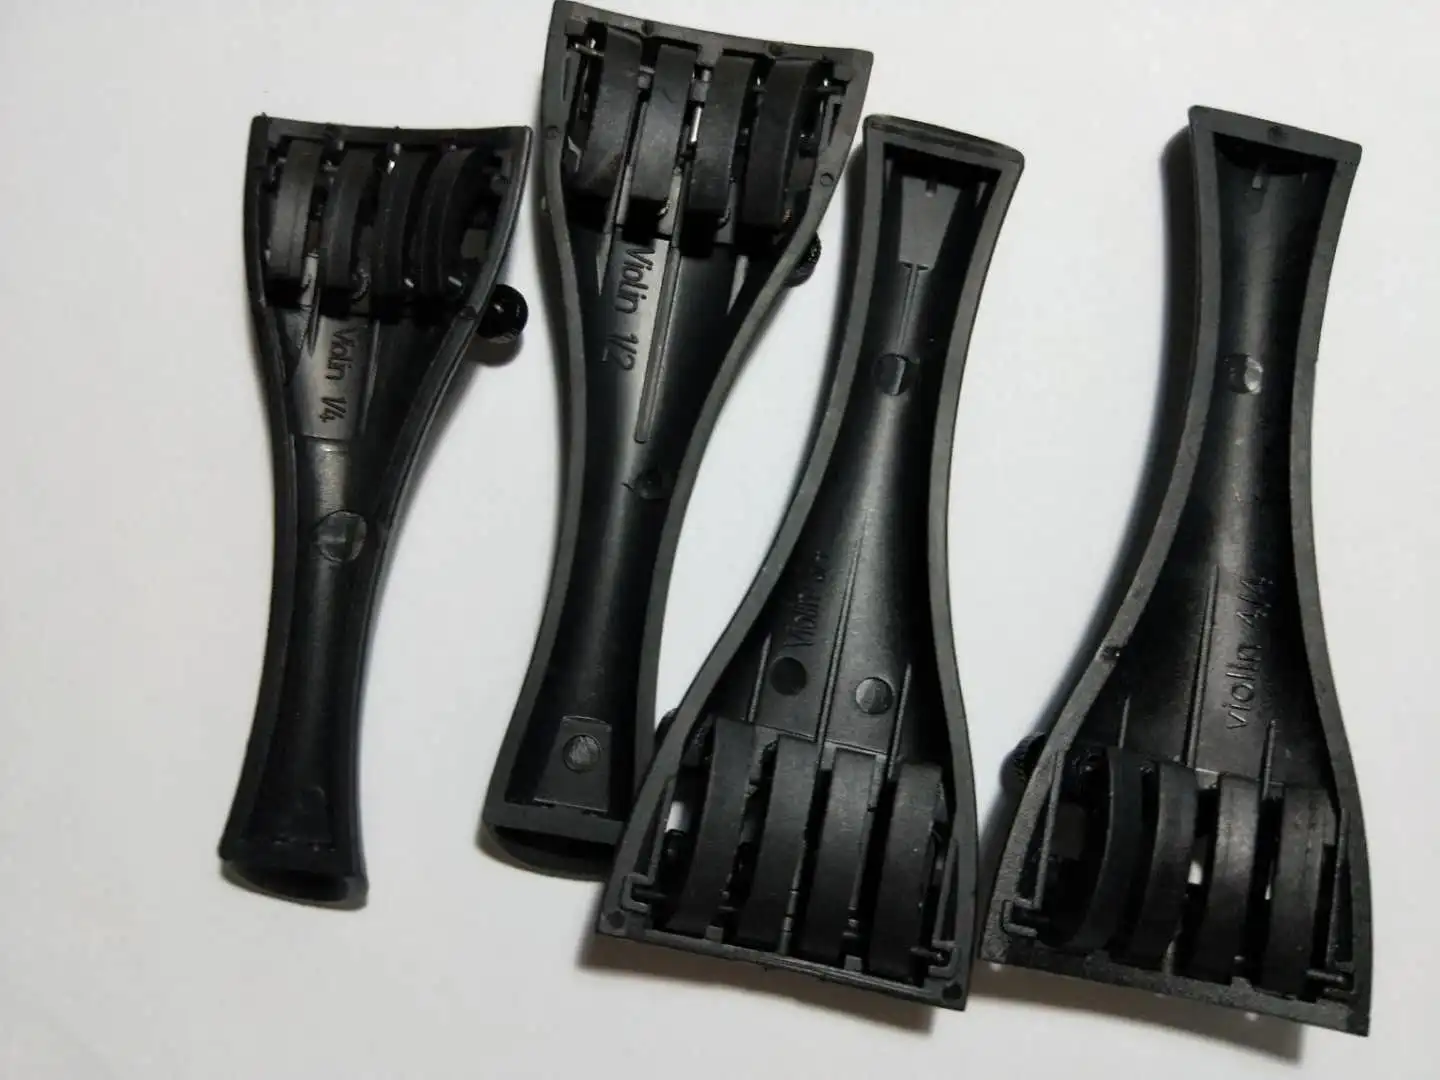 

10 PCs Quality Carbon Fiber Violin Tail Piece with String Adjusters From 1/4 1/2 3/4 To 4/4 with10PCs Free Nylon Guts